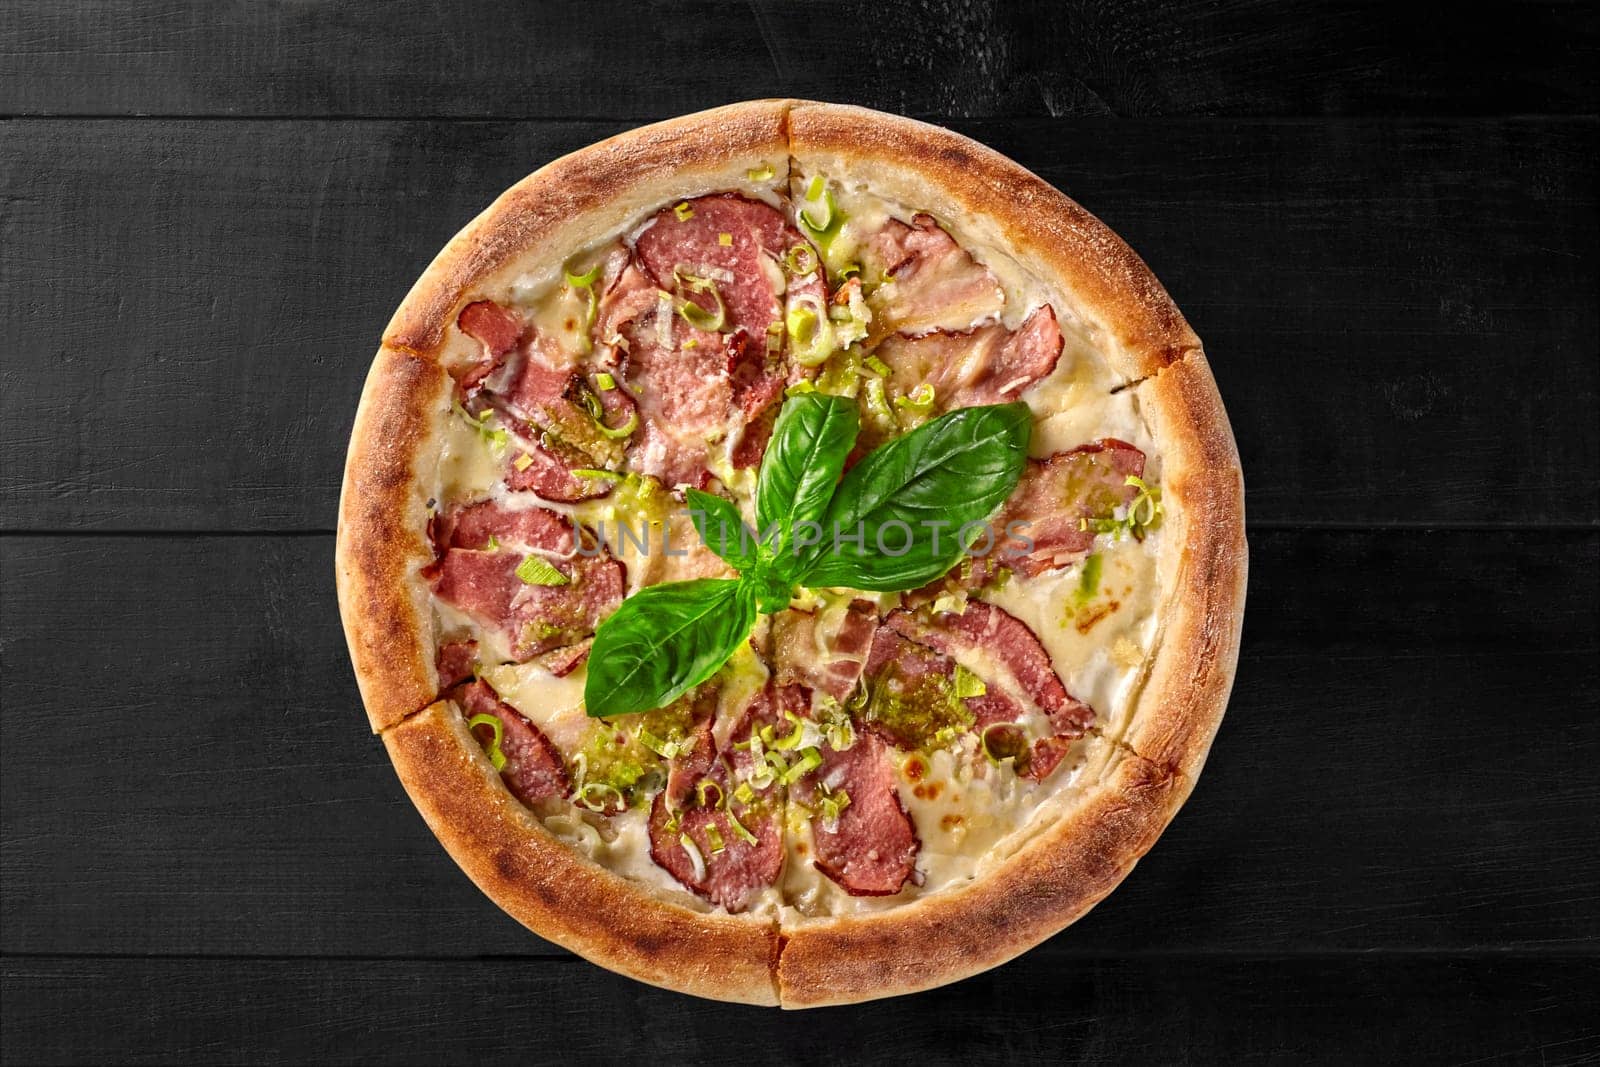 Top view of appetizing pizza with cream cheese sauce topped with smoked bacon and ham slices seasoned with pesto sauce garnished with fresh basil and shallot on black wooden background